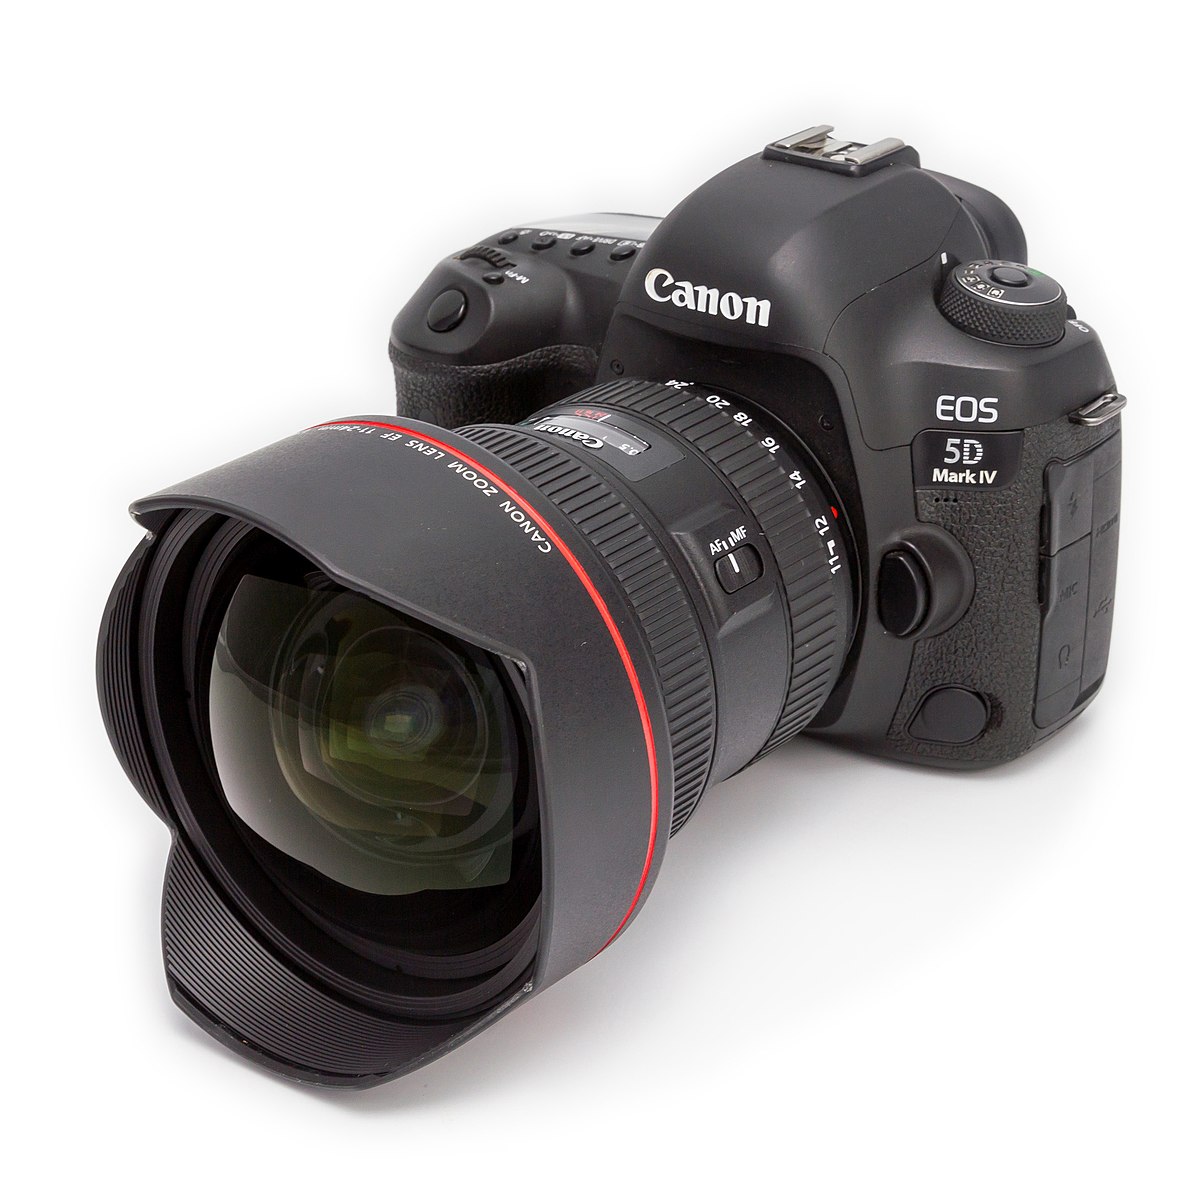 The Canon EOS 5D Mark IV body with lens attached to it